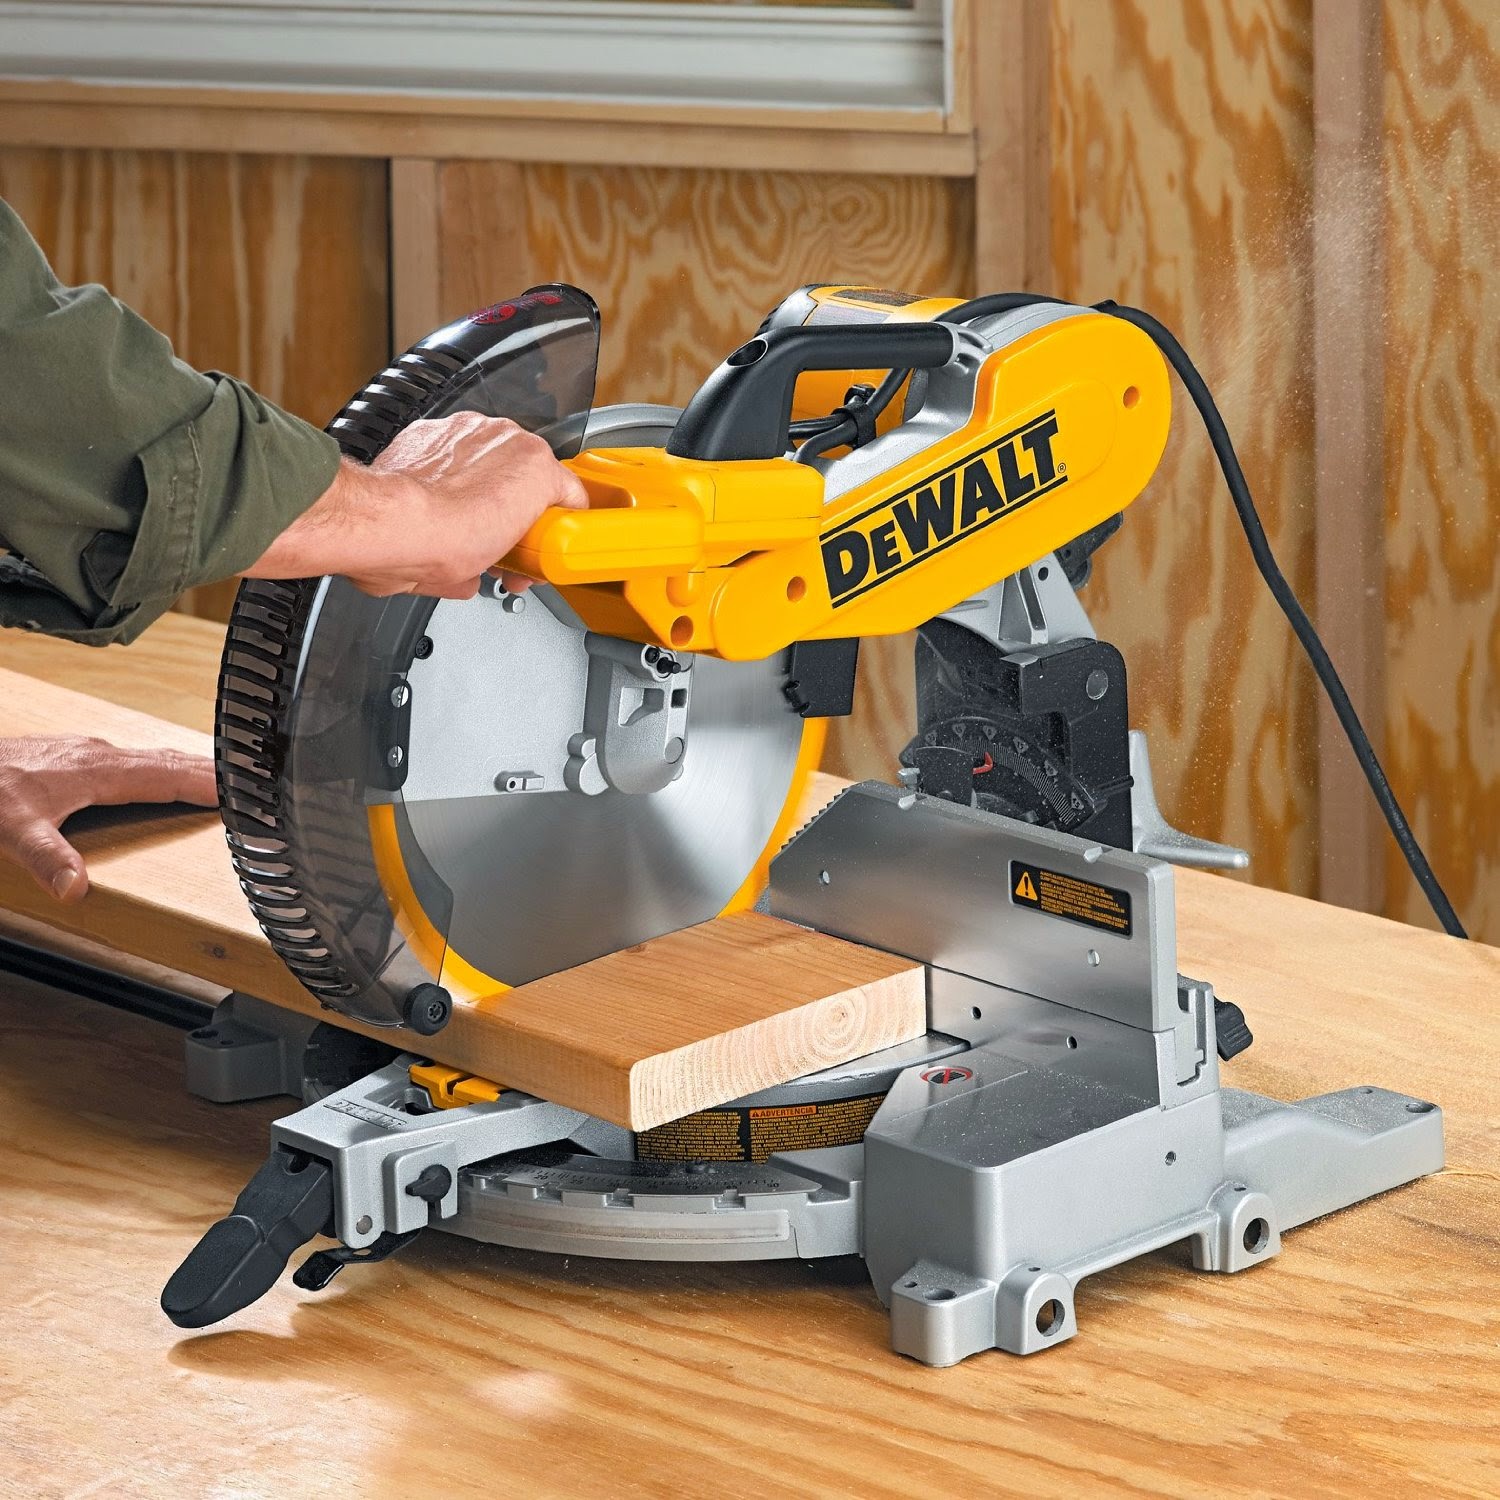 DEWALT DW716 15 Amp 12-Inch Double-Bevel Compound Miter Saw, picture, image, review features and specifications